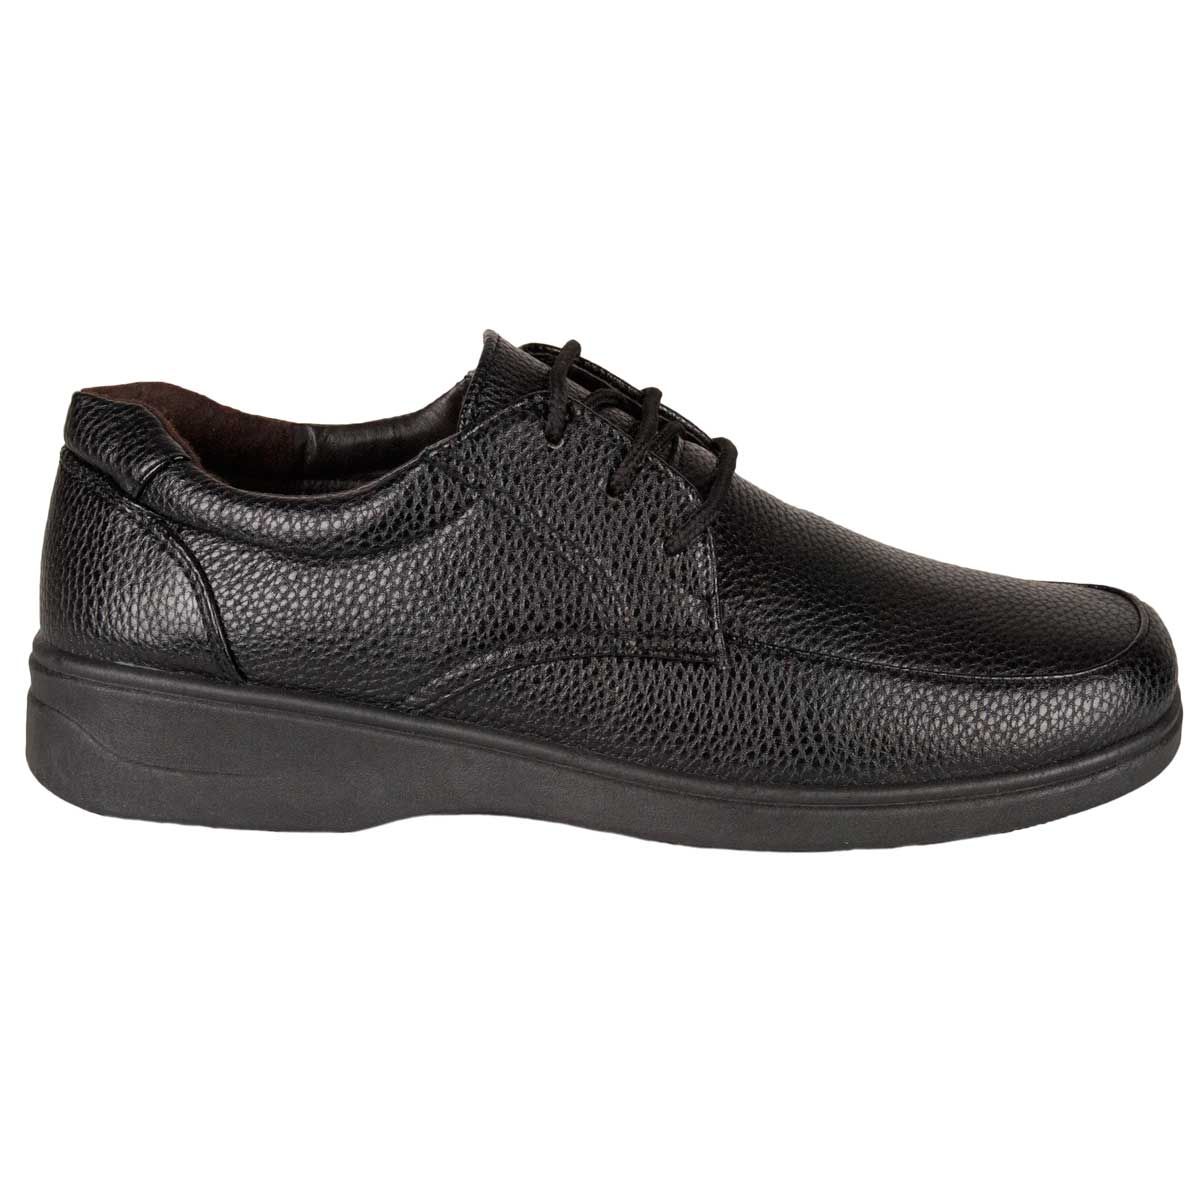 Comfortable and light Oxford for men with laces of thick thread, perfect for the day for its super flexible and perfectly adaptable to the foot. The ankle area is padded, to provide greater comfort. Previous and later buttock, as well as double seam, providing the shoe firmness and consistency. Leather, removable template. Foreign material Very easy to clean. Light floor and anti-slip rubber sole.